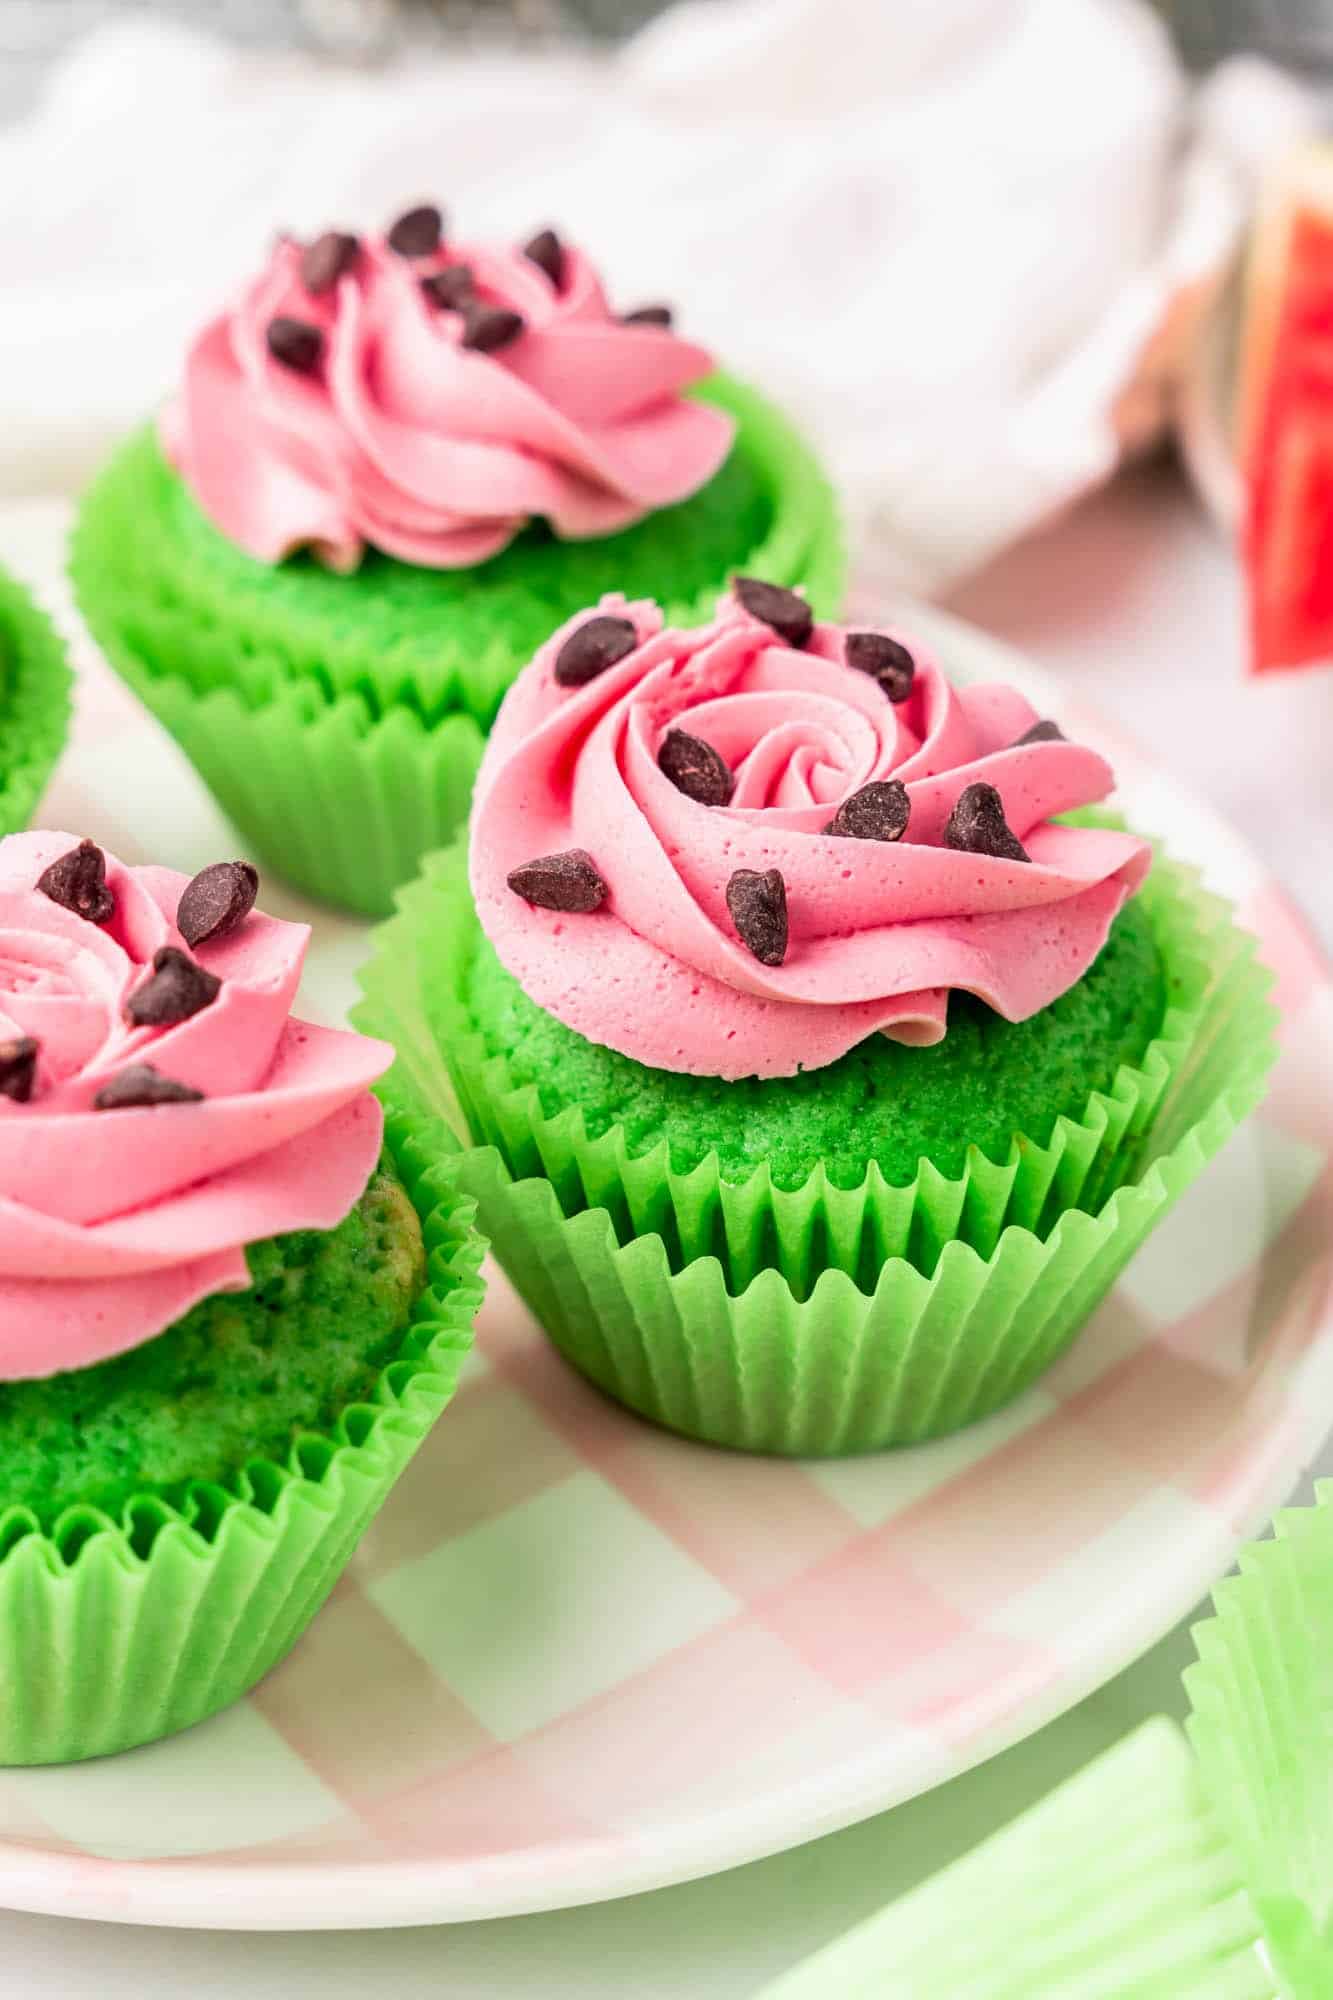 green cupcakes in green cupcake liners, topped with pink frosting and chocolate chips to resemble watermelon